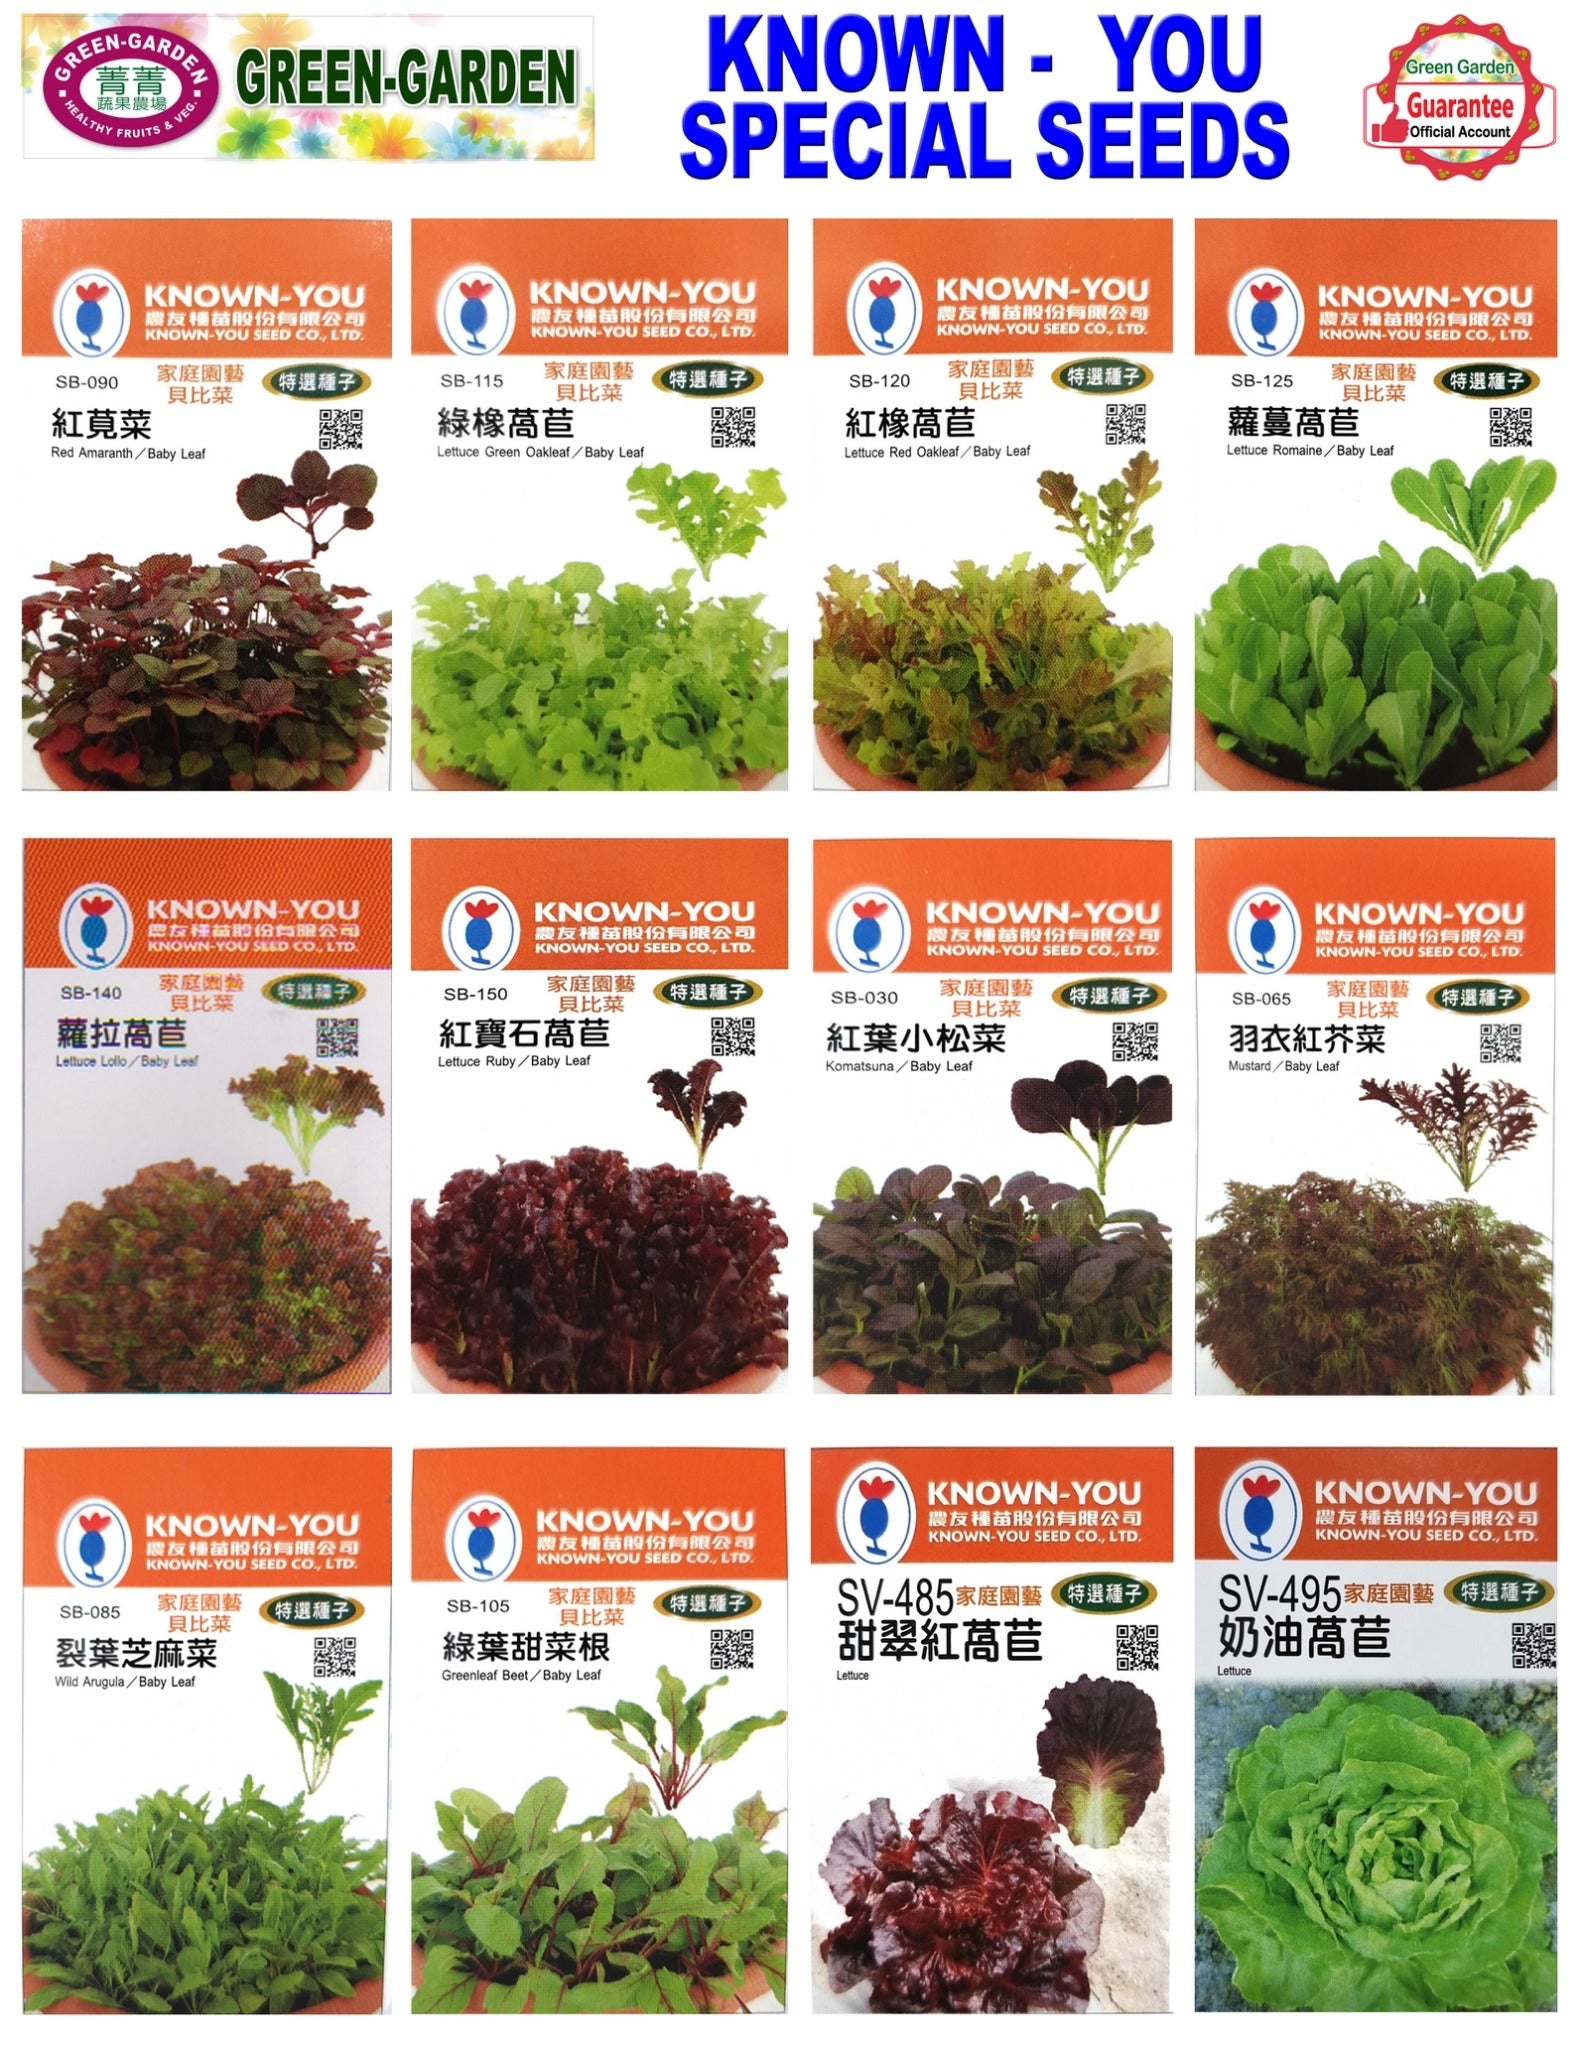 Known You Special Seeds (SB-150 Lettuce Ruby/Baby Leaf)